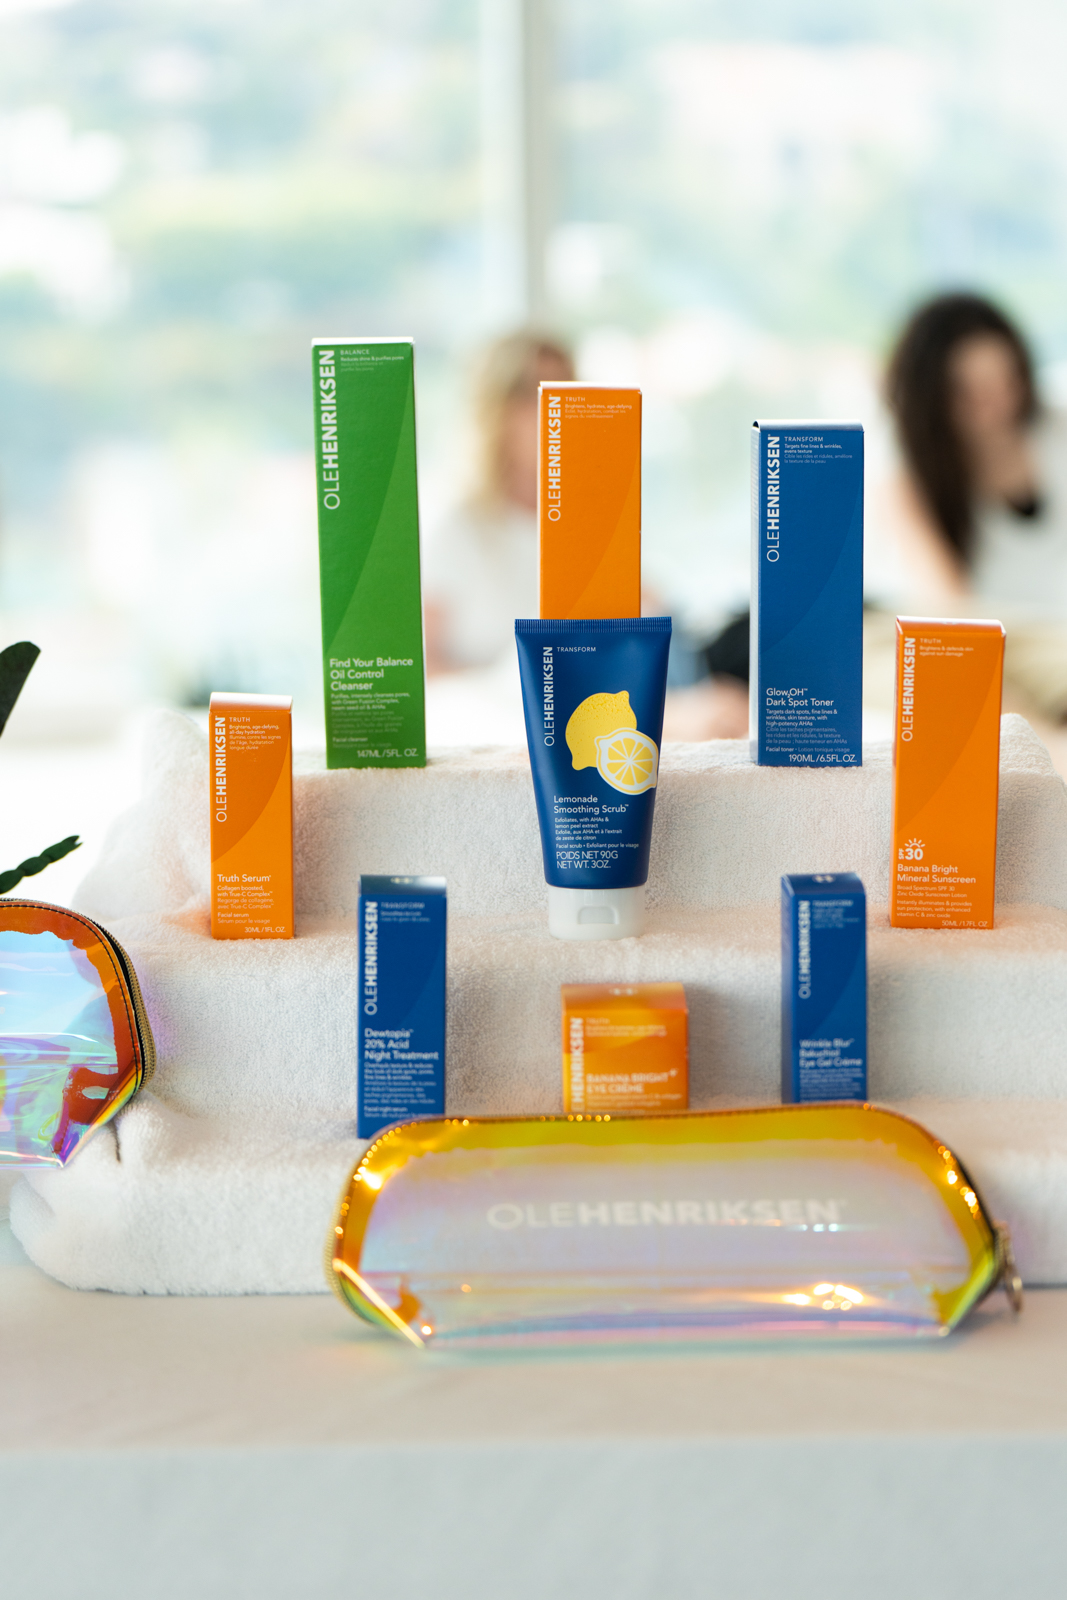 ole henriksen spa experience andaz west hollywood